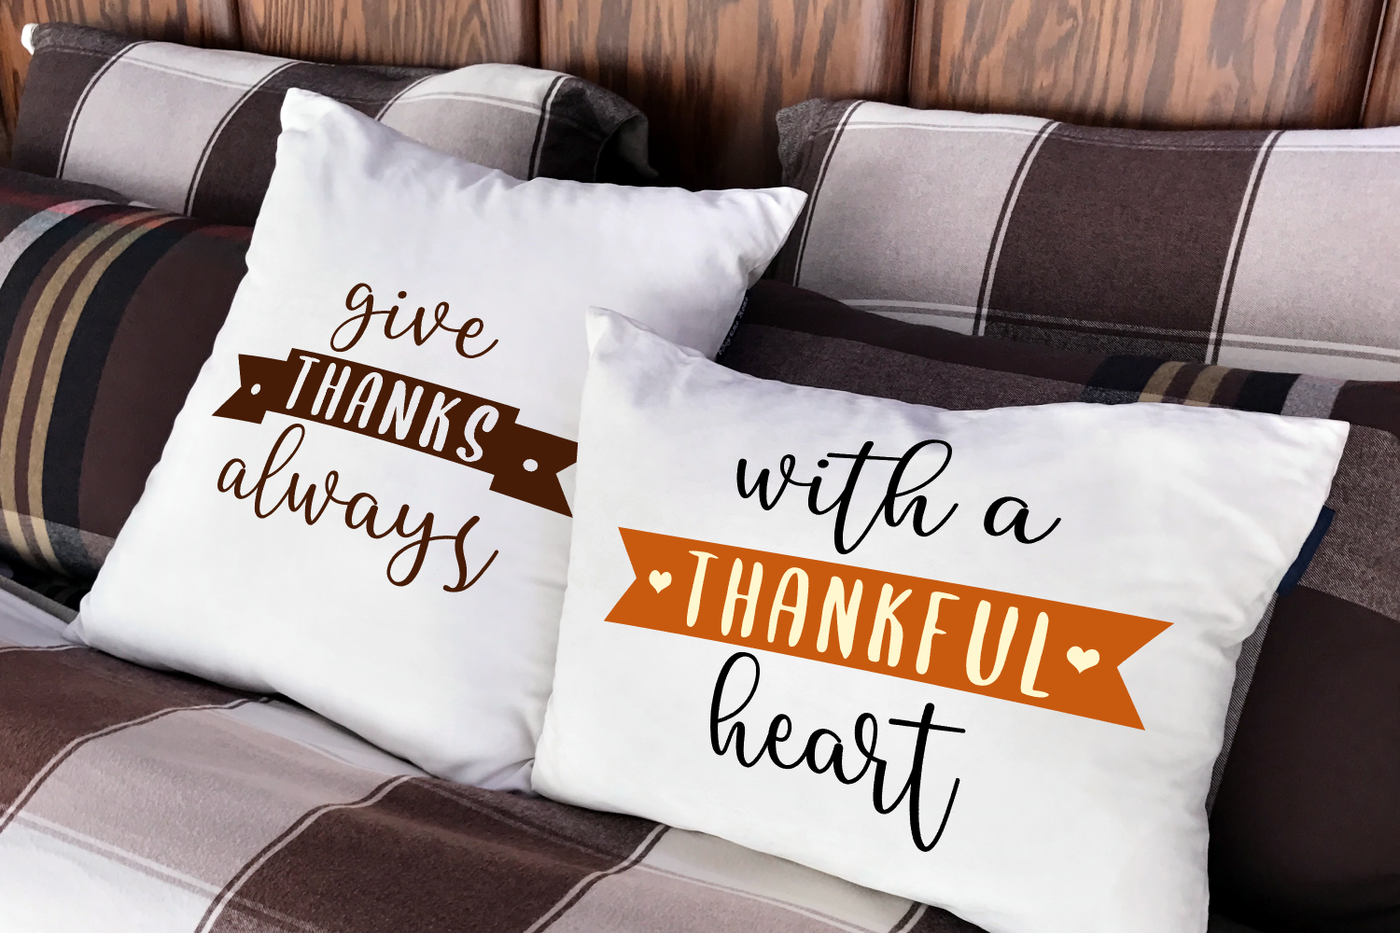 Two Thanksgiving designs. One says "give thanks always" and the other says "with a thankful heart"